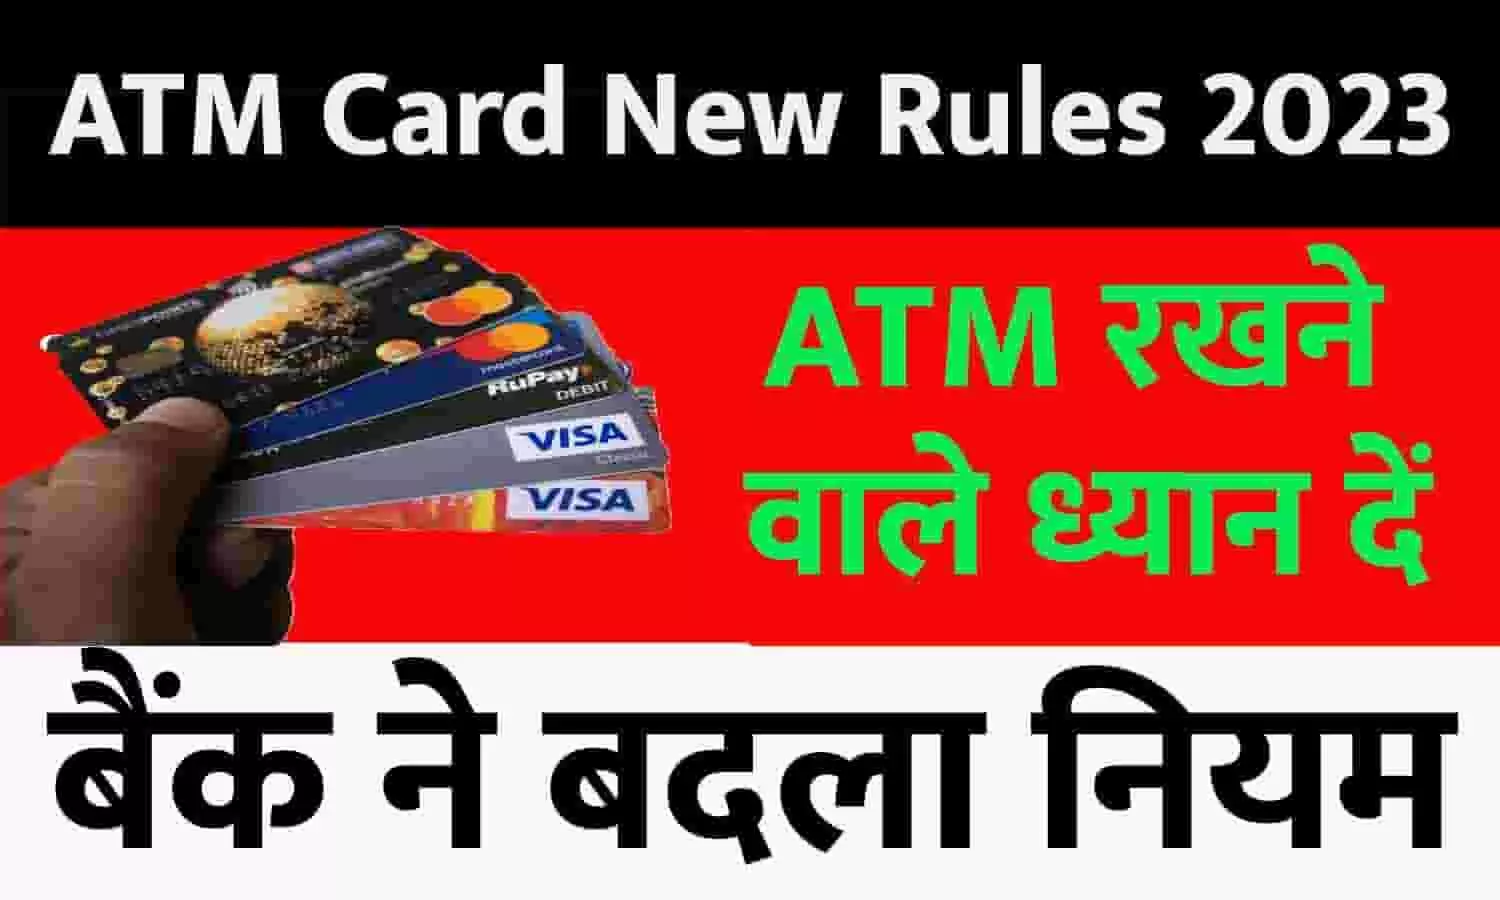 ATM Card New Rules